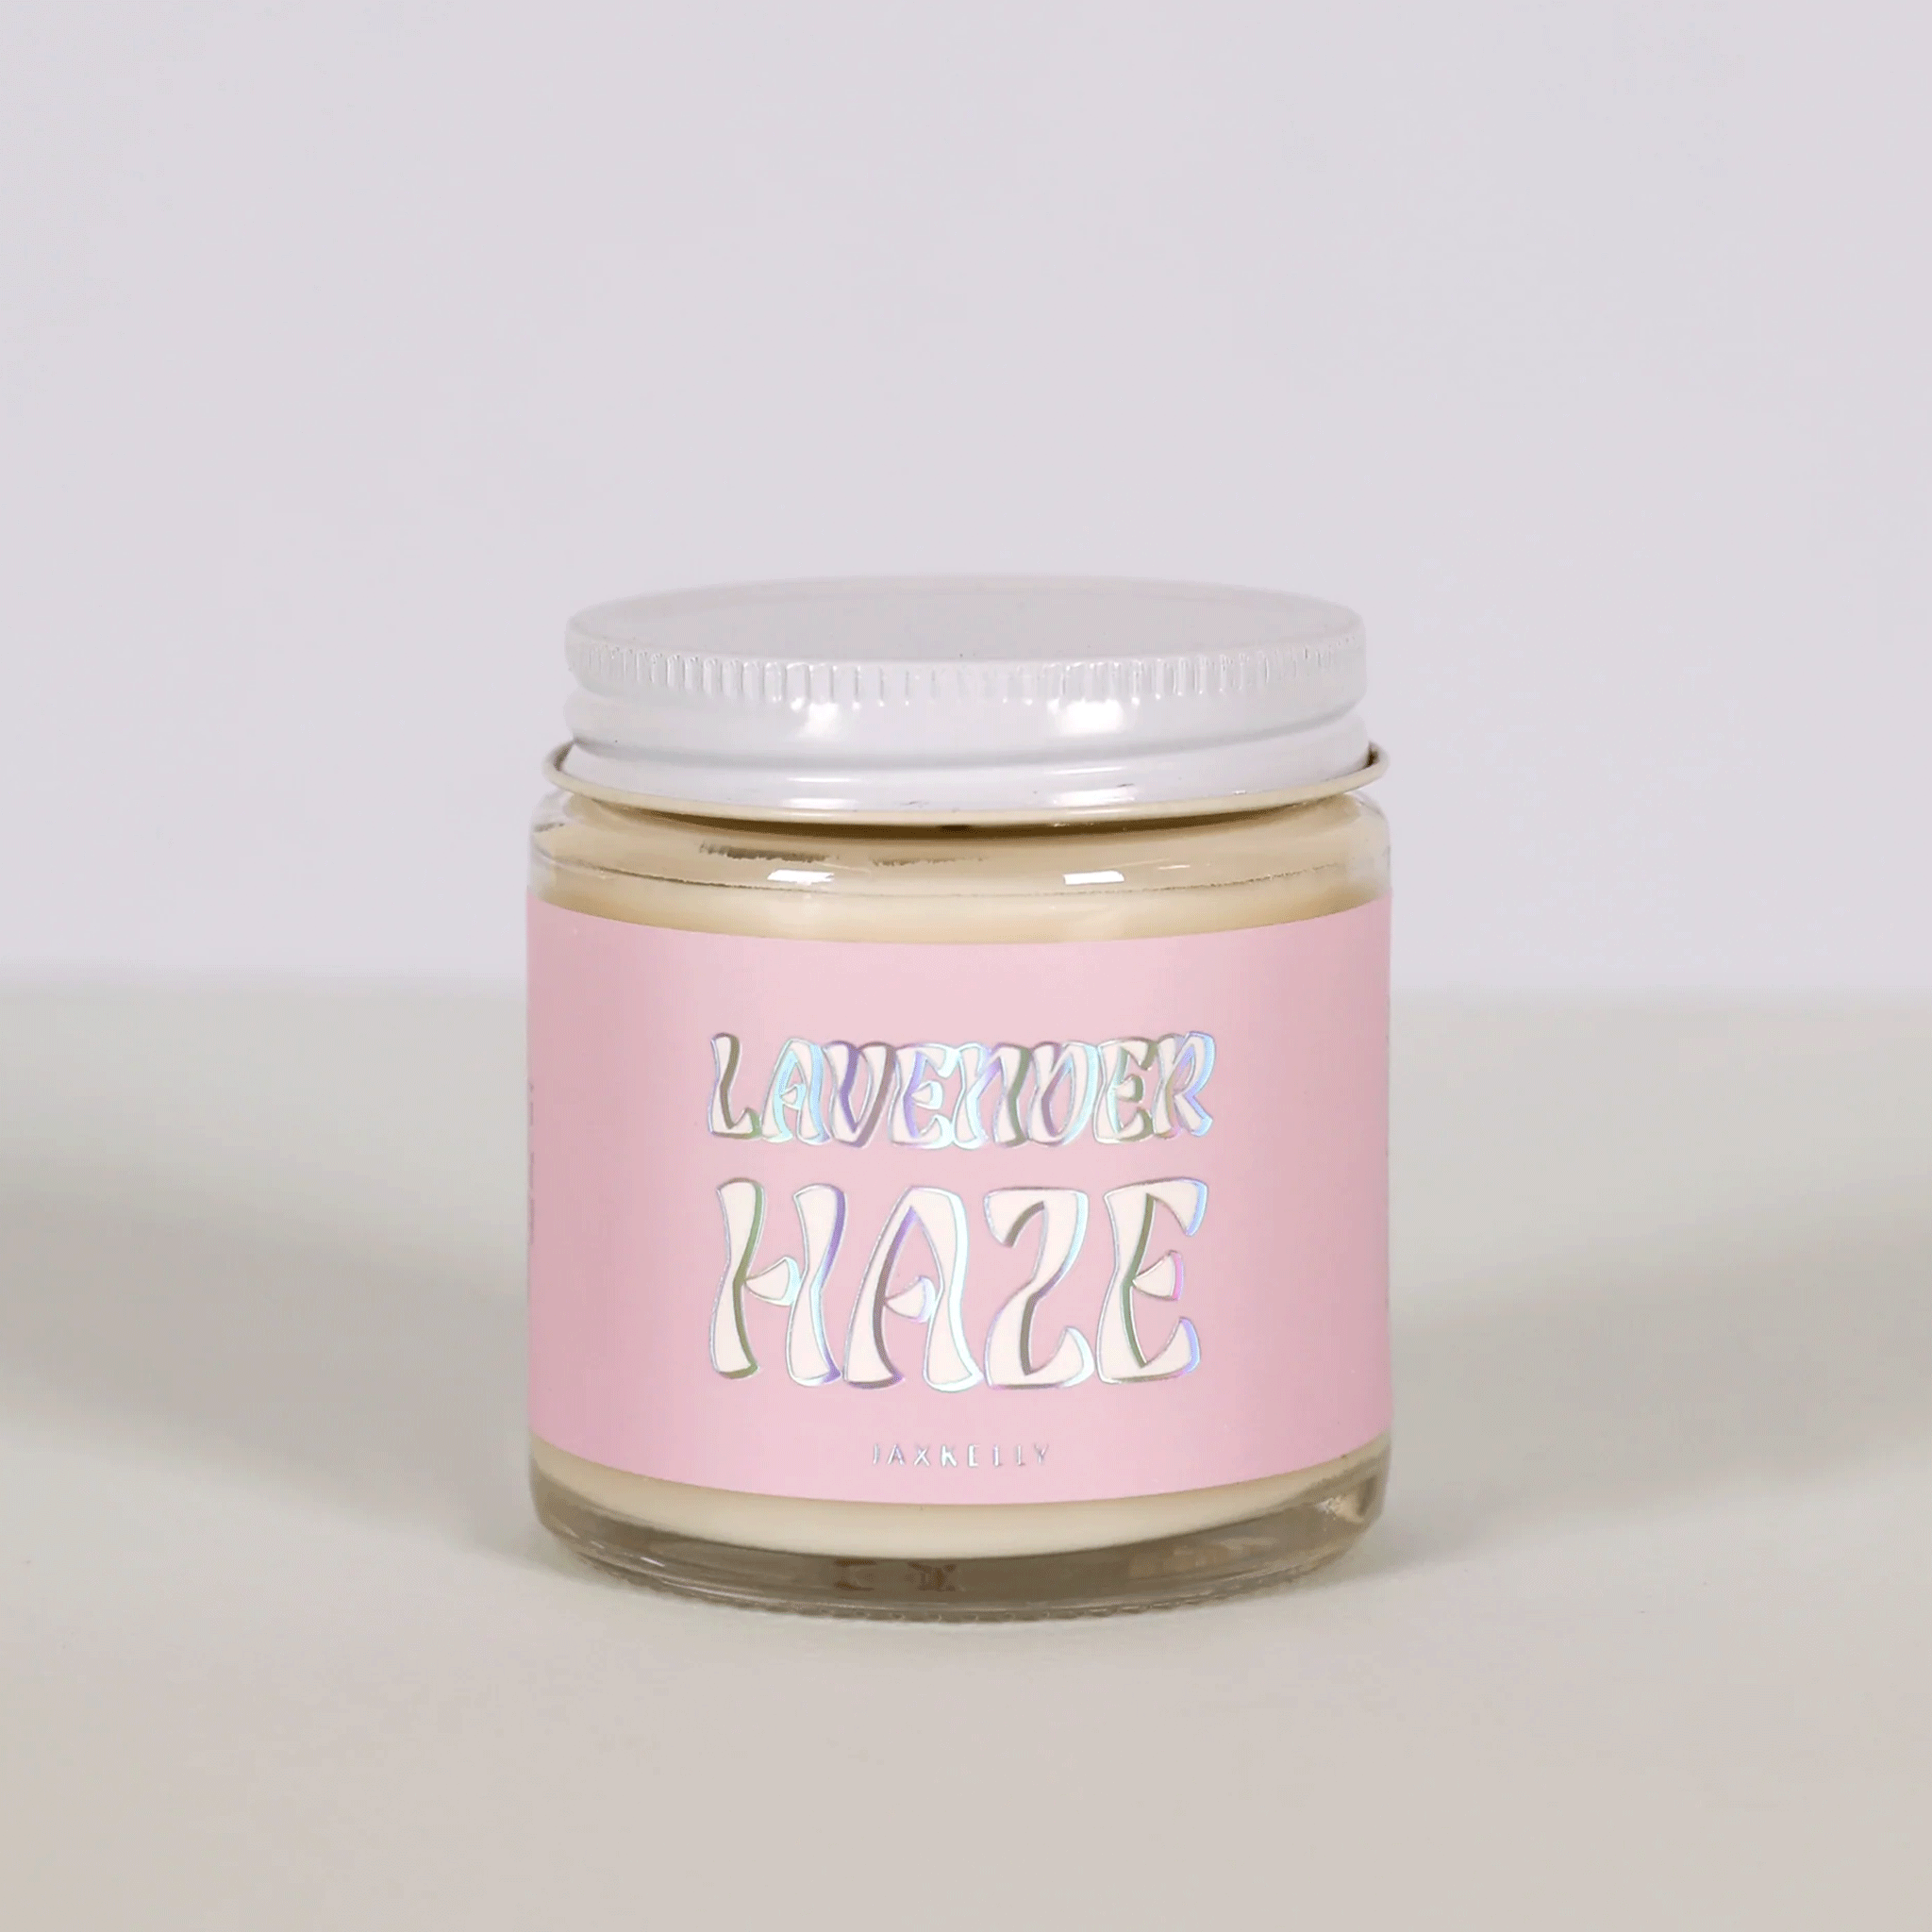 On a white background is a 4oz glass jar candle with a light pink label that reads, &quot;Lavender Haze&quot; in a holographic wavy font.